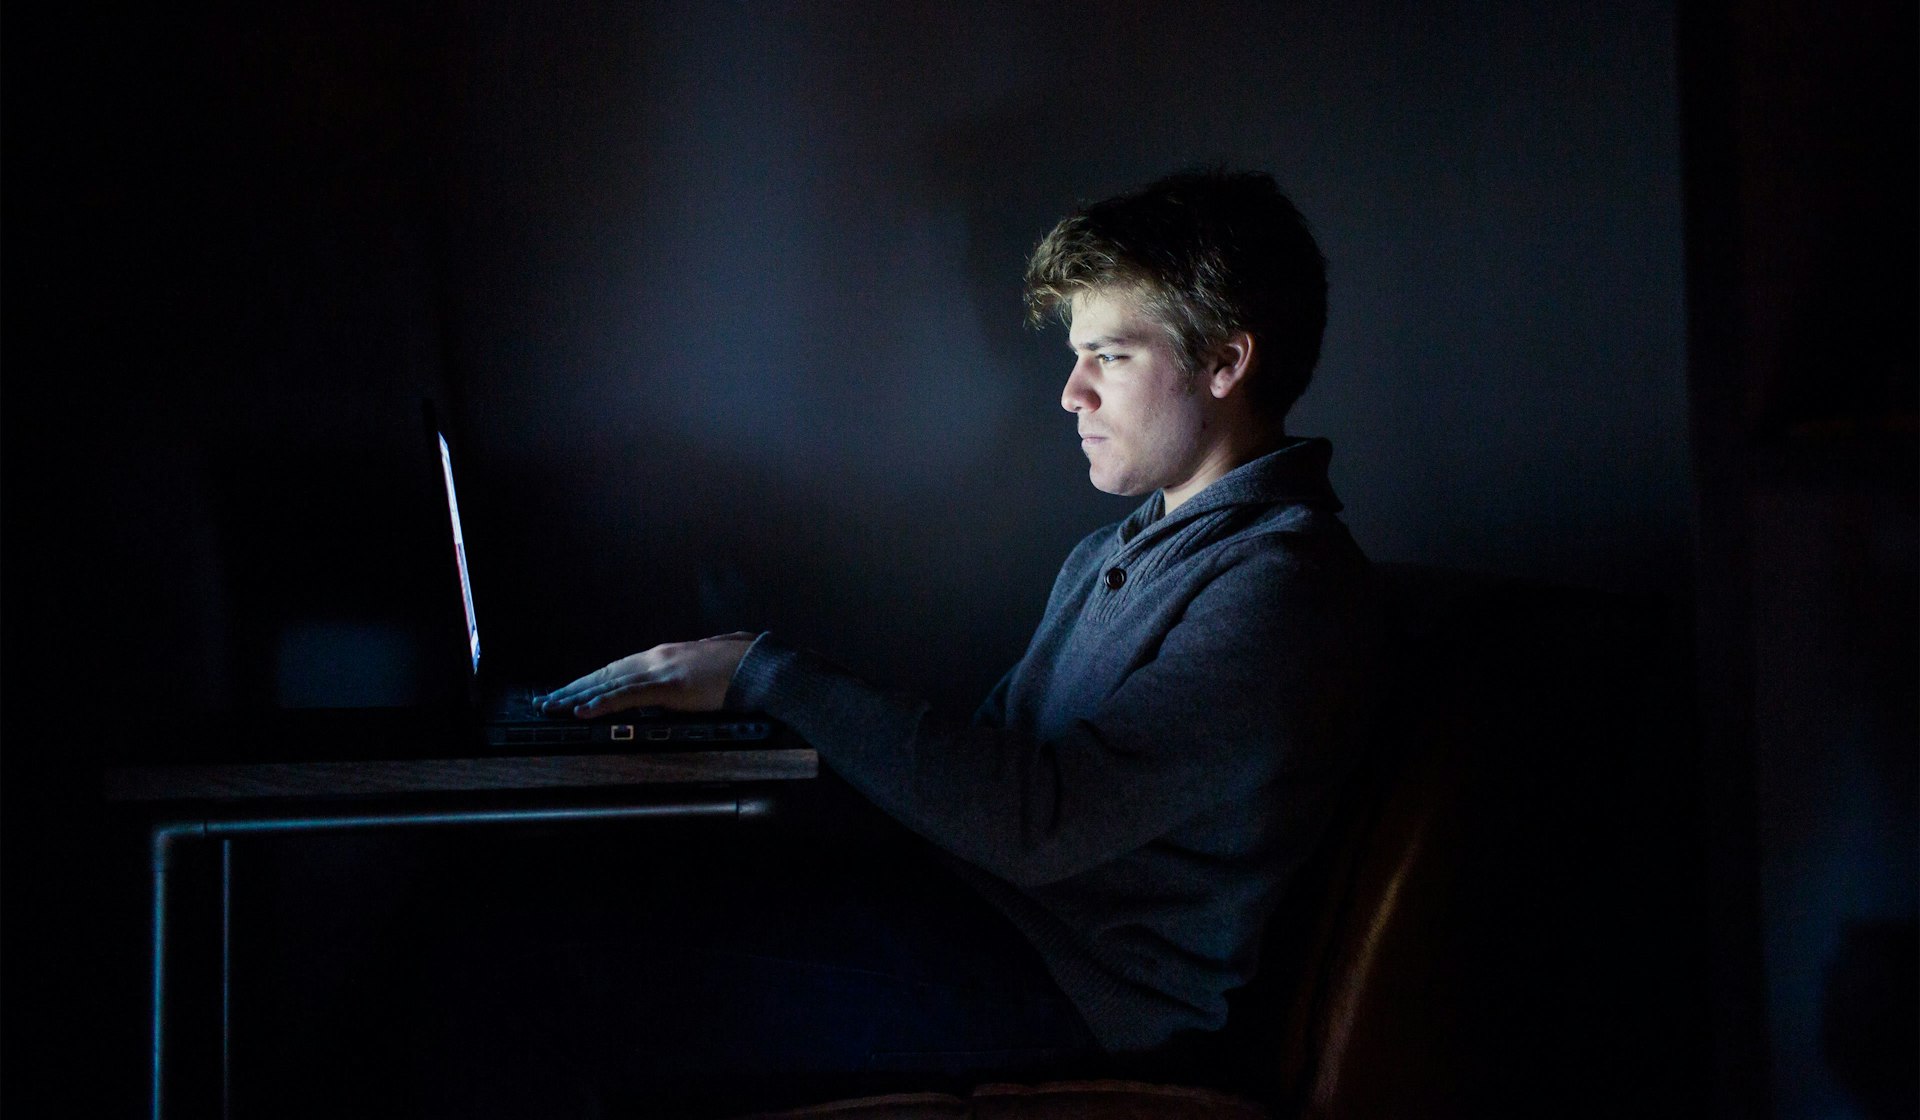 How coder Zach Sims realised his dream of never working for anyone